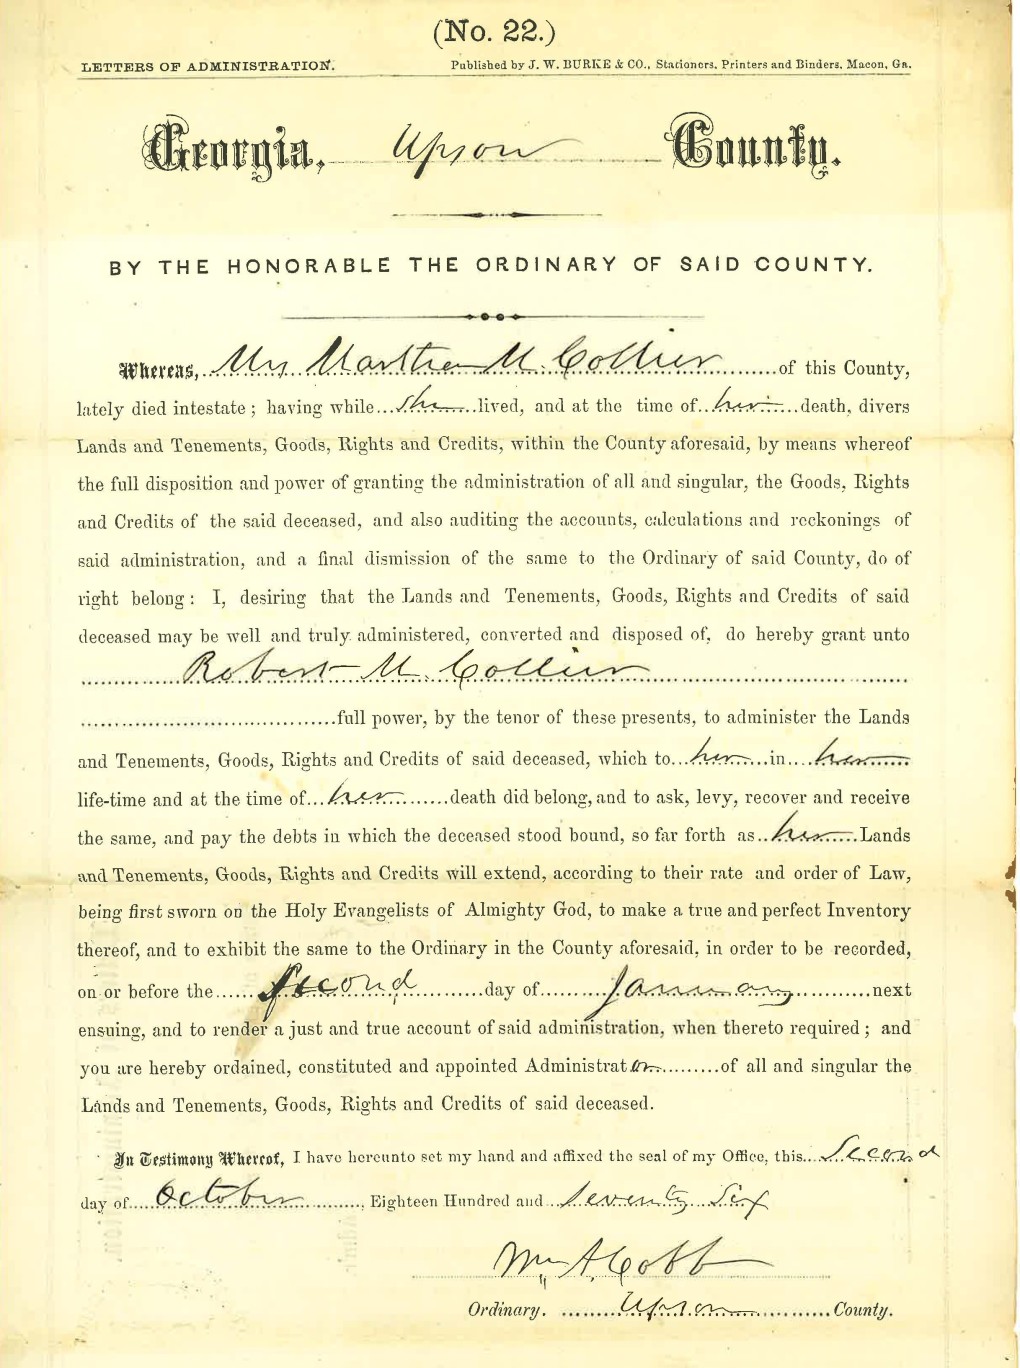 1876_10_02_Ltr of Adminsitration RMC for Martha Collier Estate